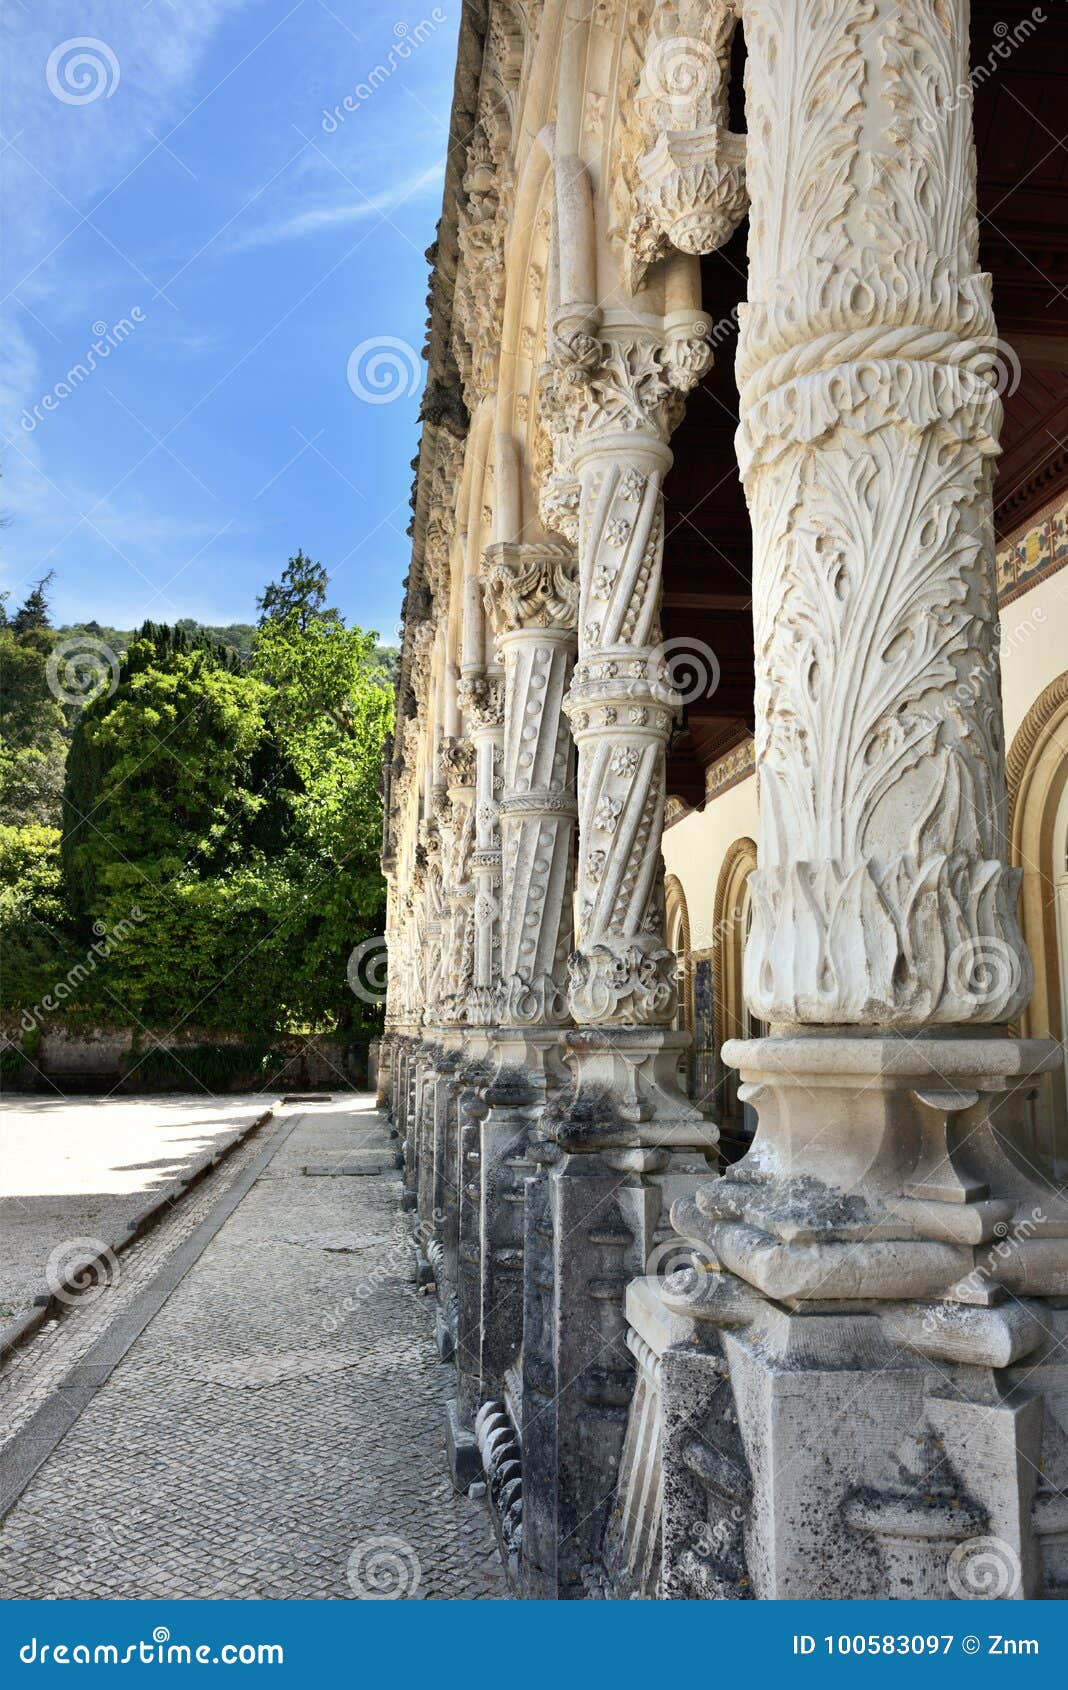 bussaco palace, portugal